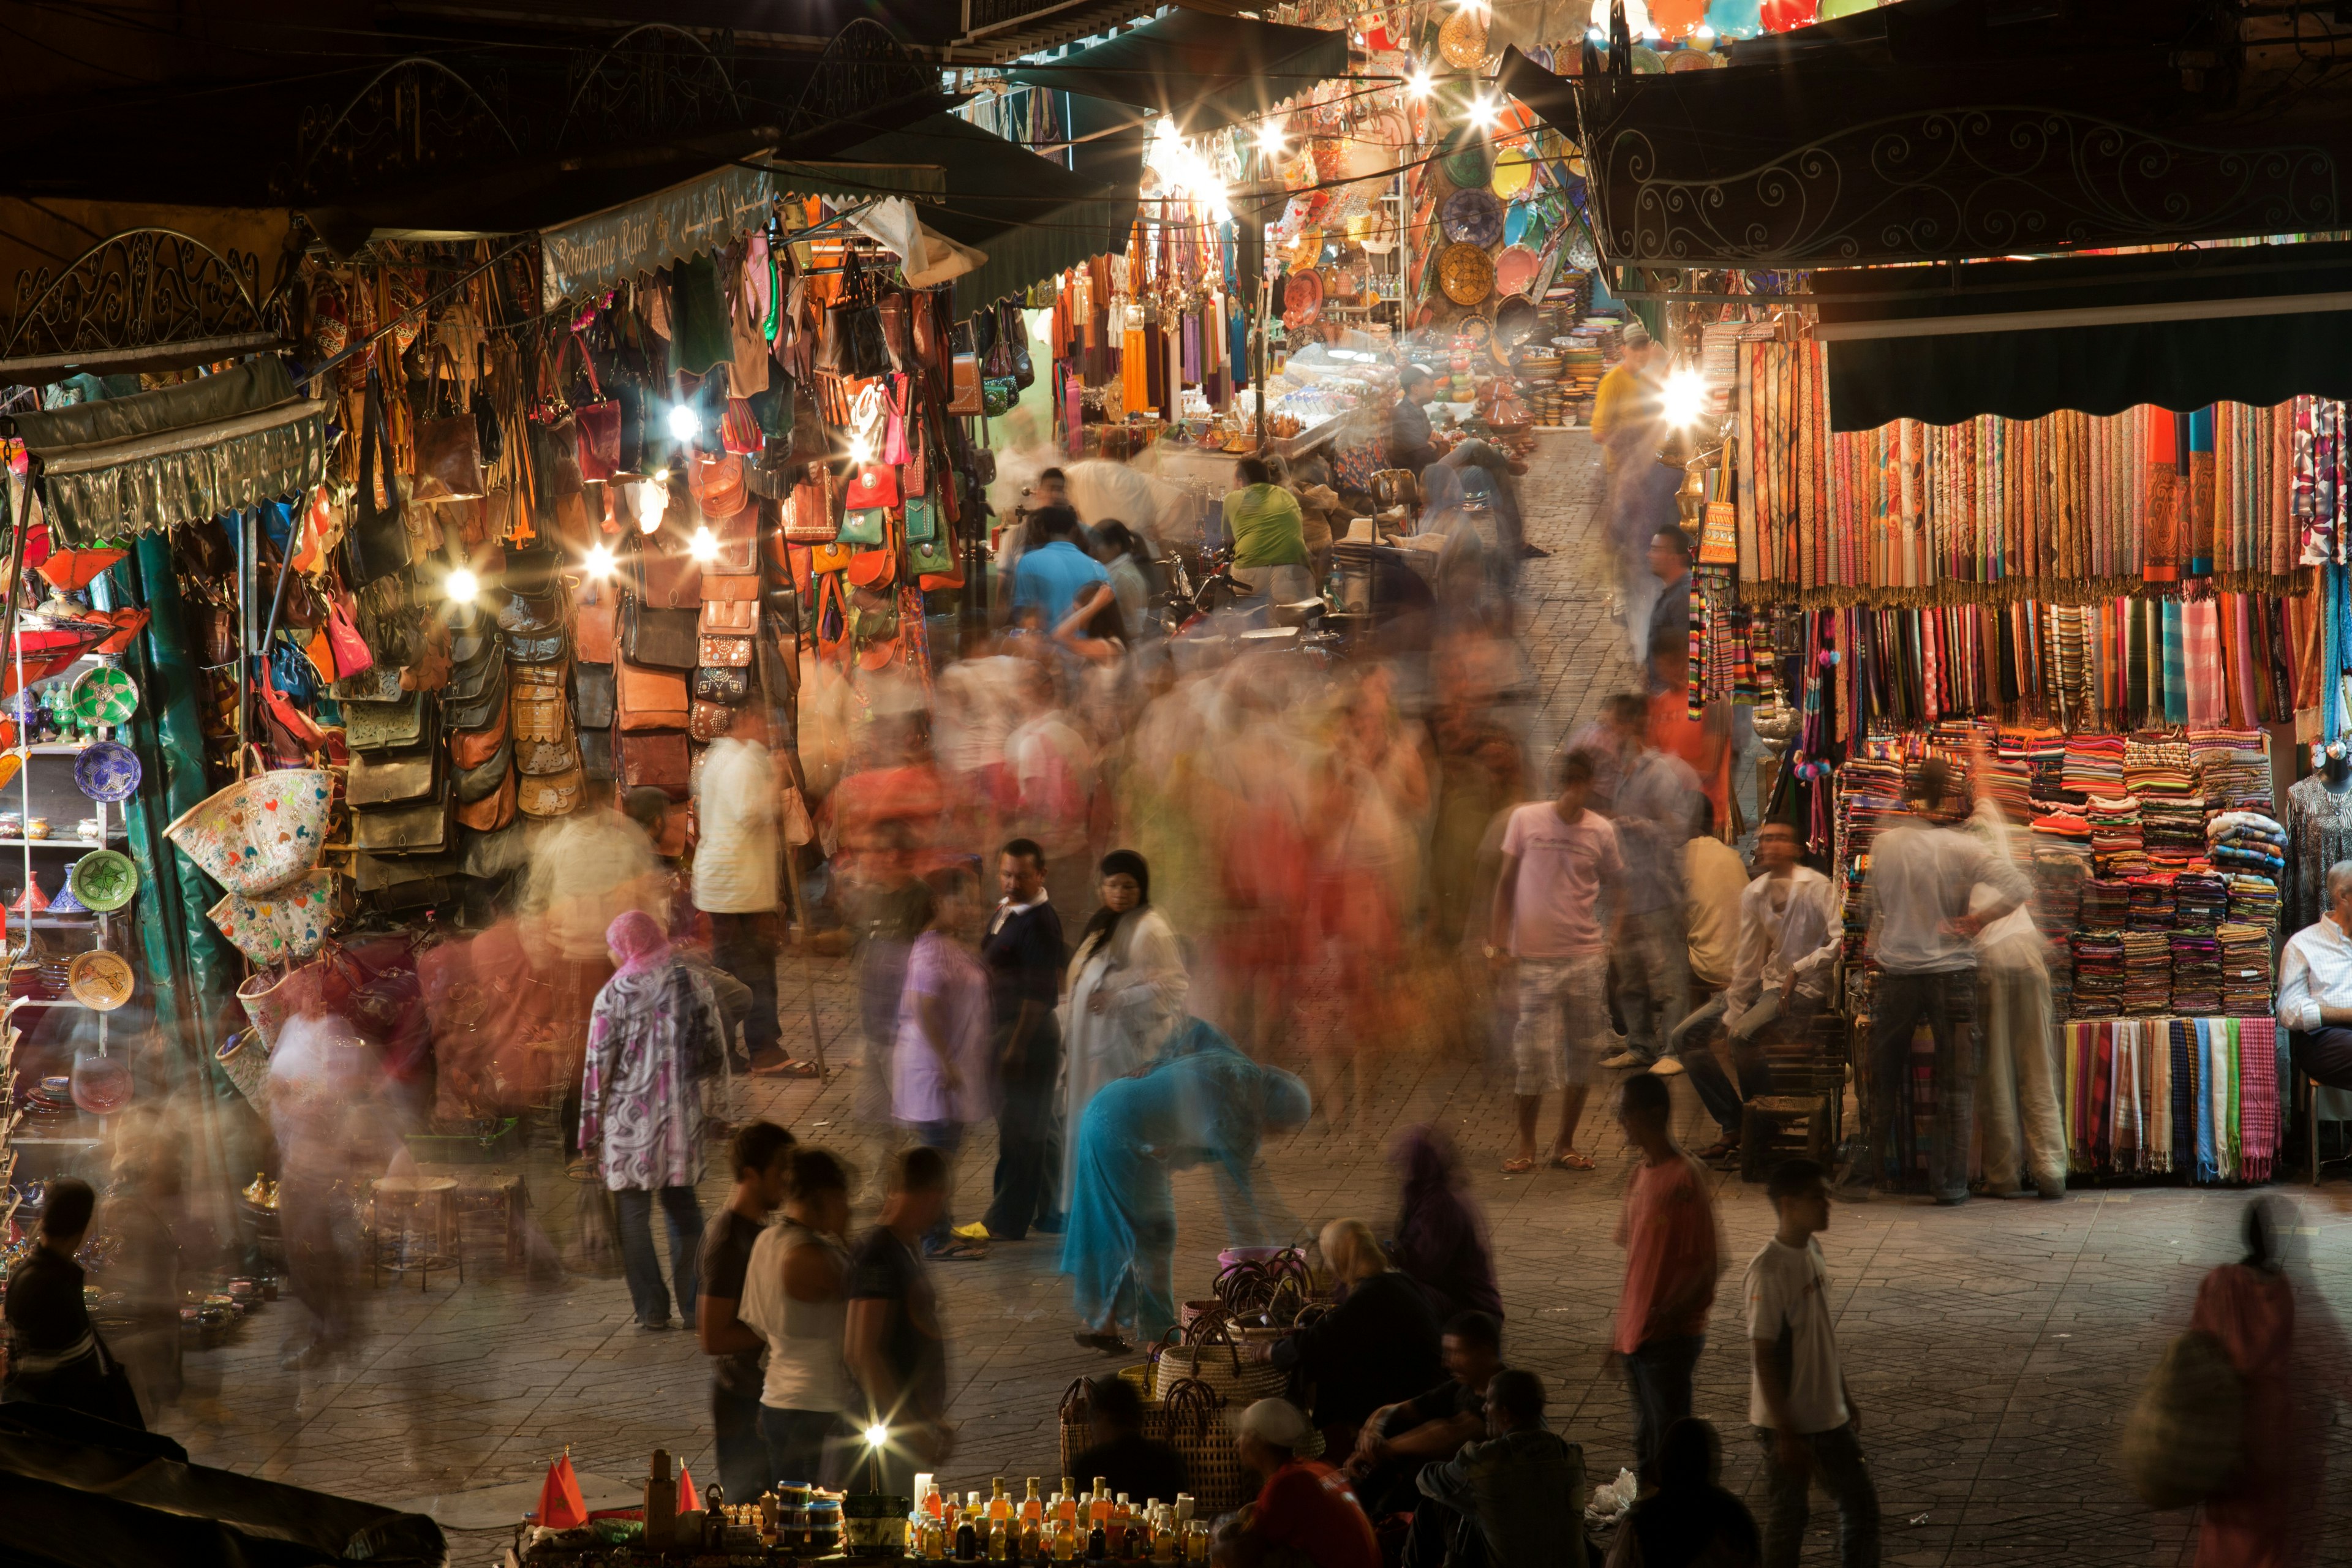 A busy market in Marrakech with a lot of people.